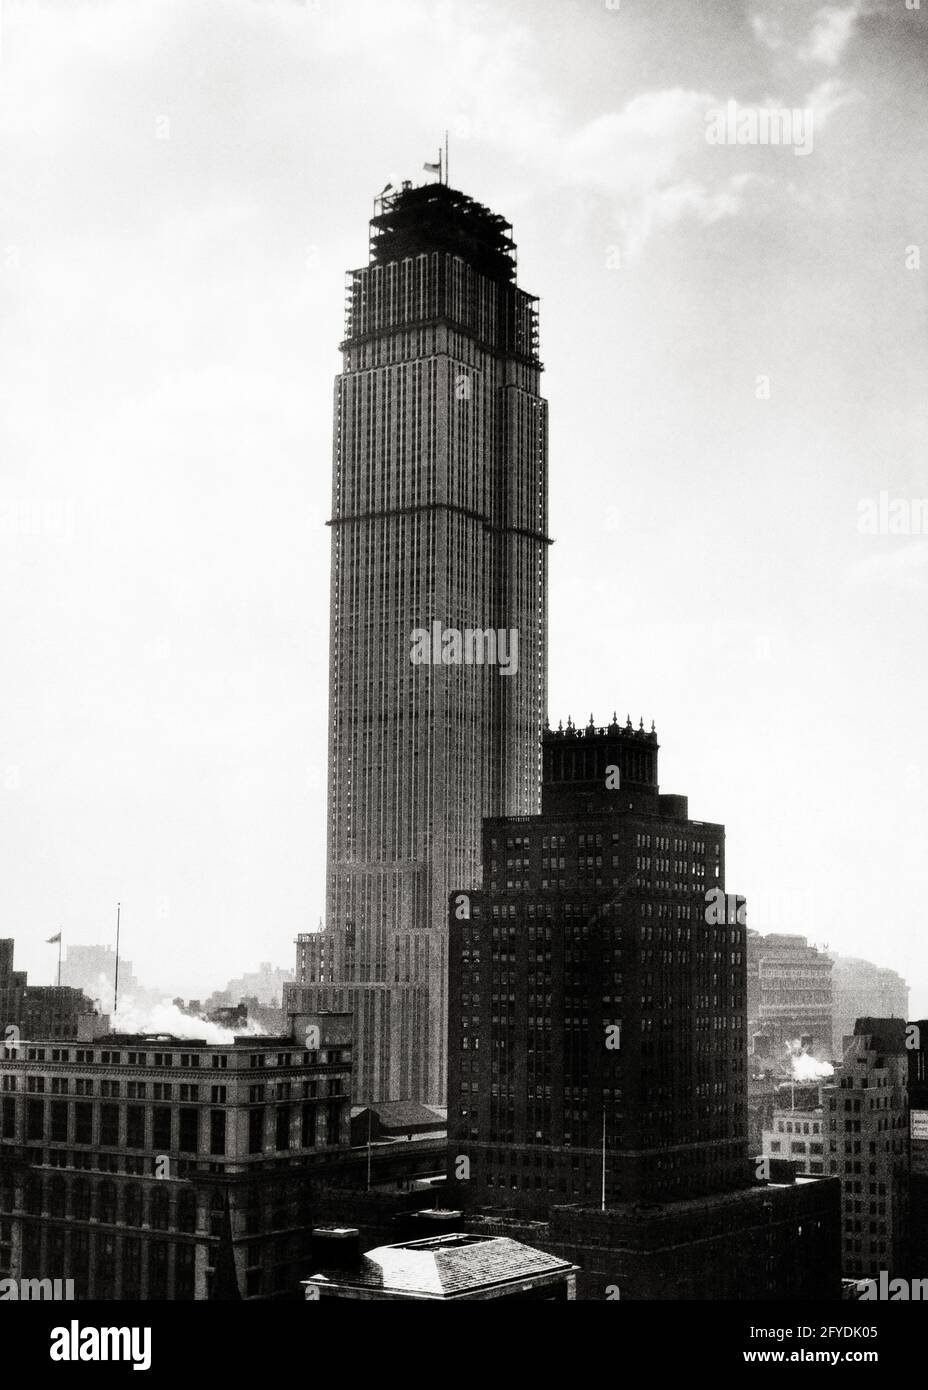 1930s NEARING COMPLETION EMPIRE STATE BUILDING UNDER CONSTRUCTION MANHATTAN FIFTH AVENUE NEW YORK CITY USA  - q74956 CPC001 HARS NYC UNFINISHED REAL ESTATE NEW YORK STRUCTURES CITIES COMPLETED EDIFICE NEARLY NEW YORK CITY COMPLETION NEARING SYMBOLIC CREATIVITY NATIONAL HISTORIC LANDMARK SKYSCRAPER TOURIST ATTRACTION ART DECO BLACK AND WHITE EMPIRE STATE BUILDING FIFTH AVENUE ICONIC LANDMARK OLD FASHIONED Stock Photo